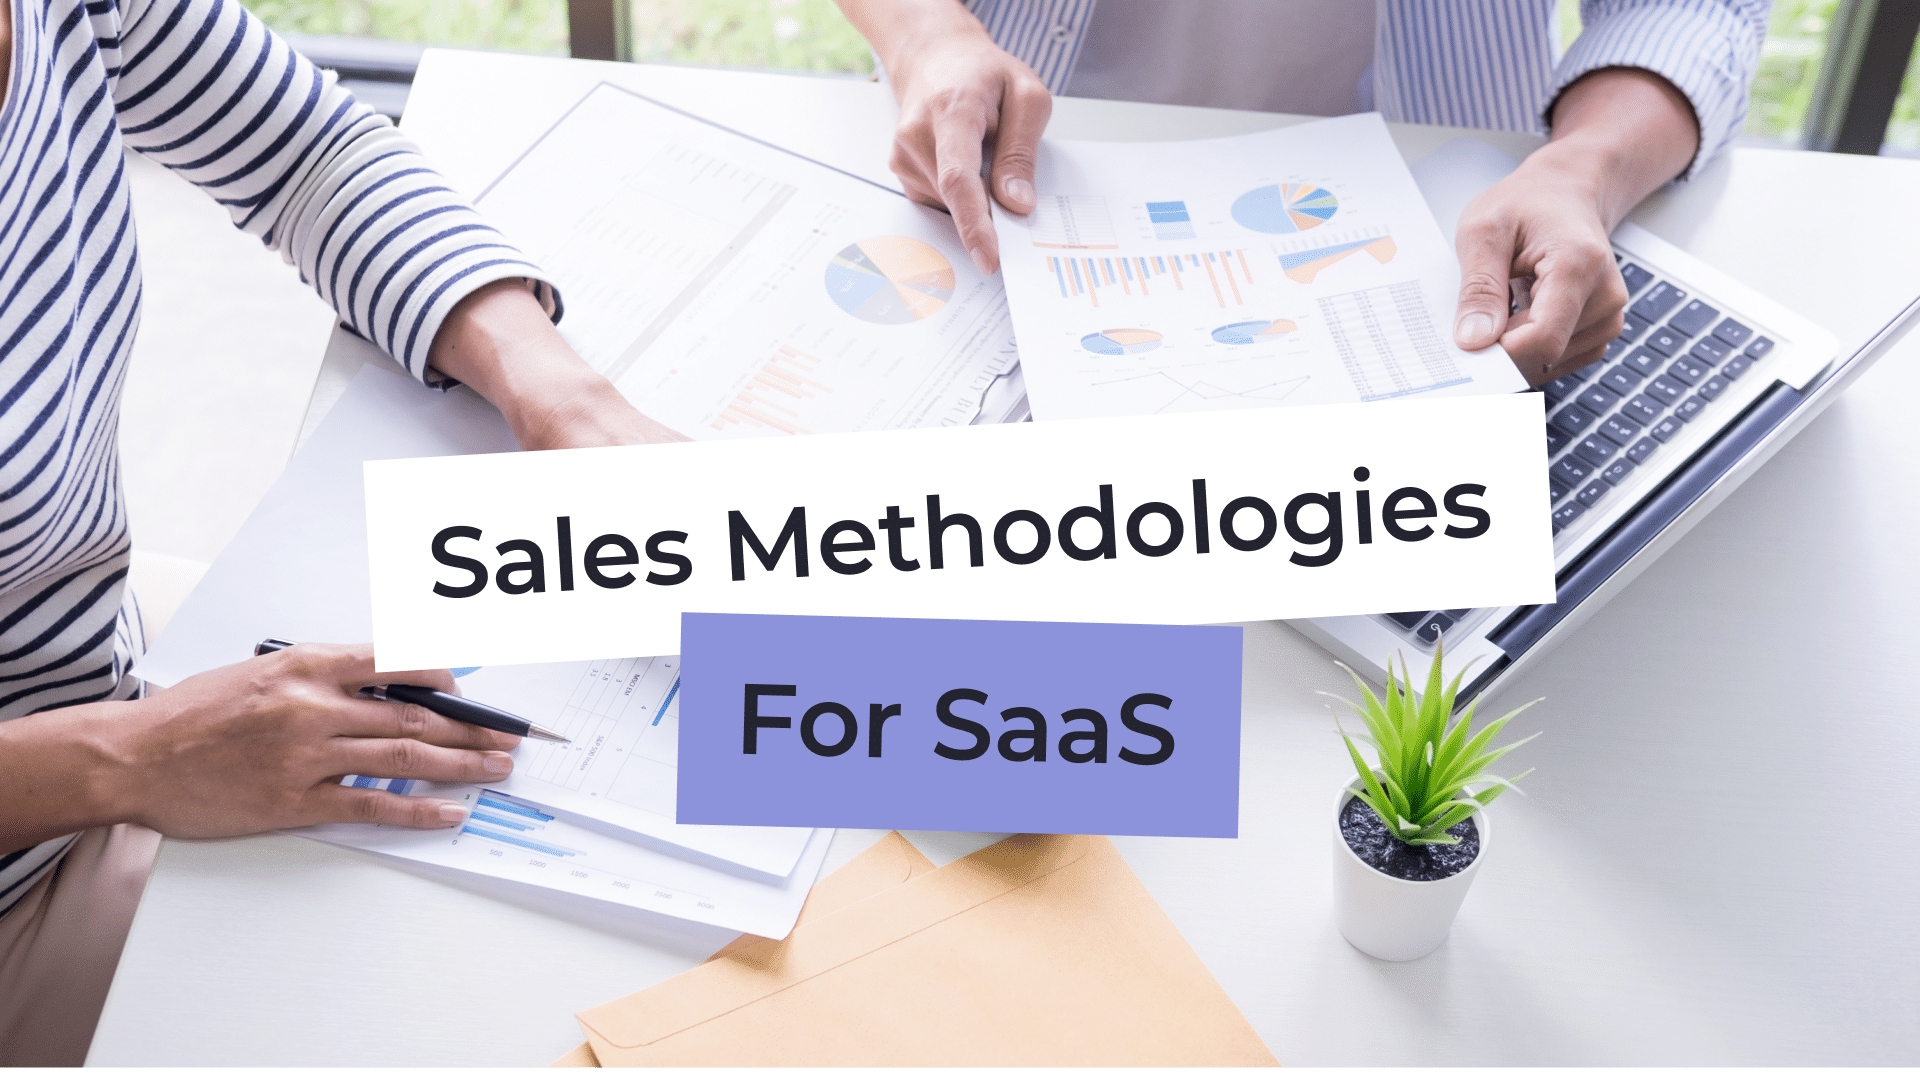 7 Sales Methodologies For SaaS & How to Pick the One For Your Business